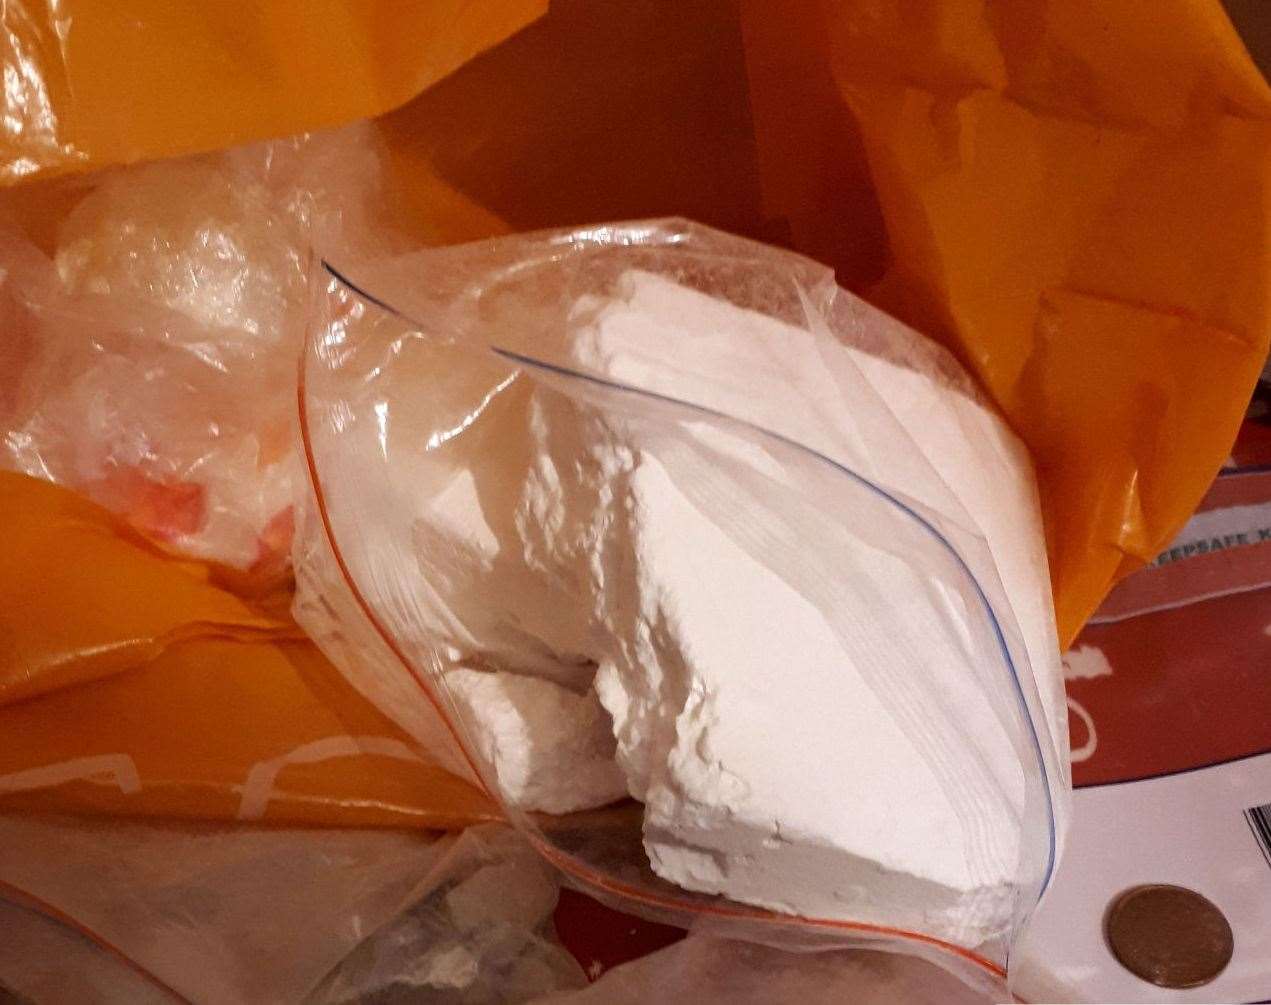 Around around 700 wraps of crack cocaine and heroin have been seized in the last week Pictures: Kent Police